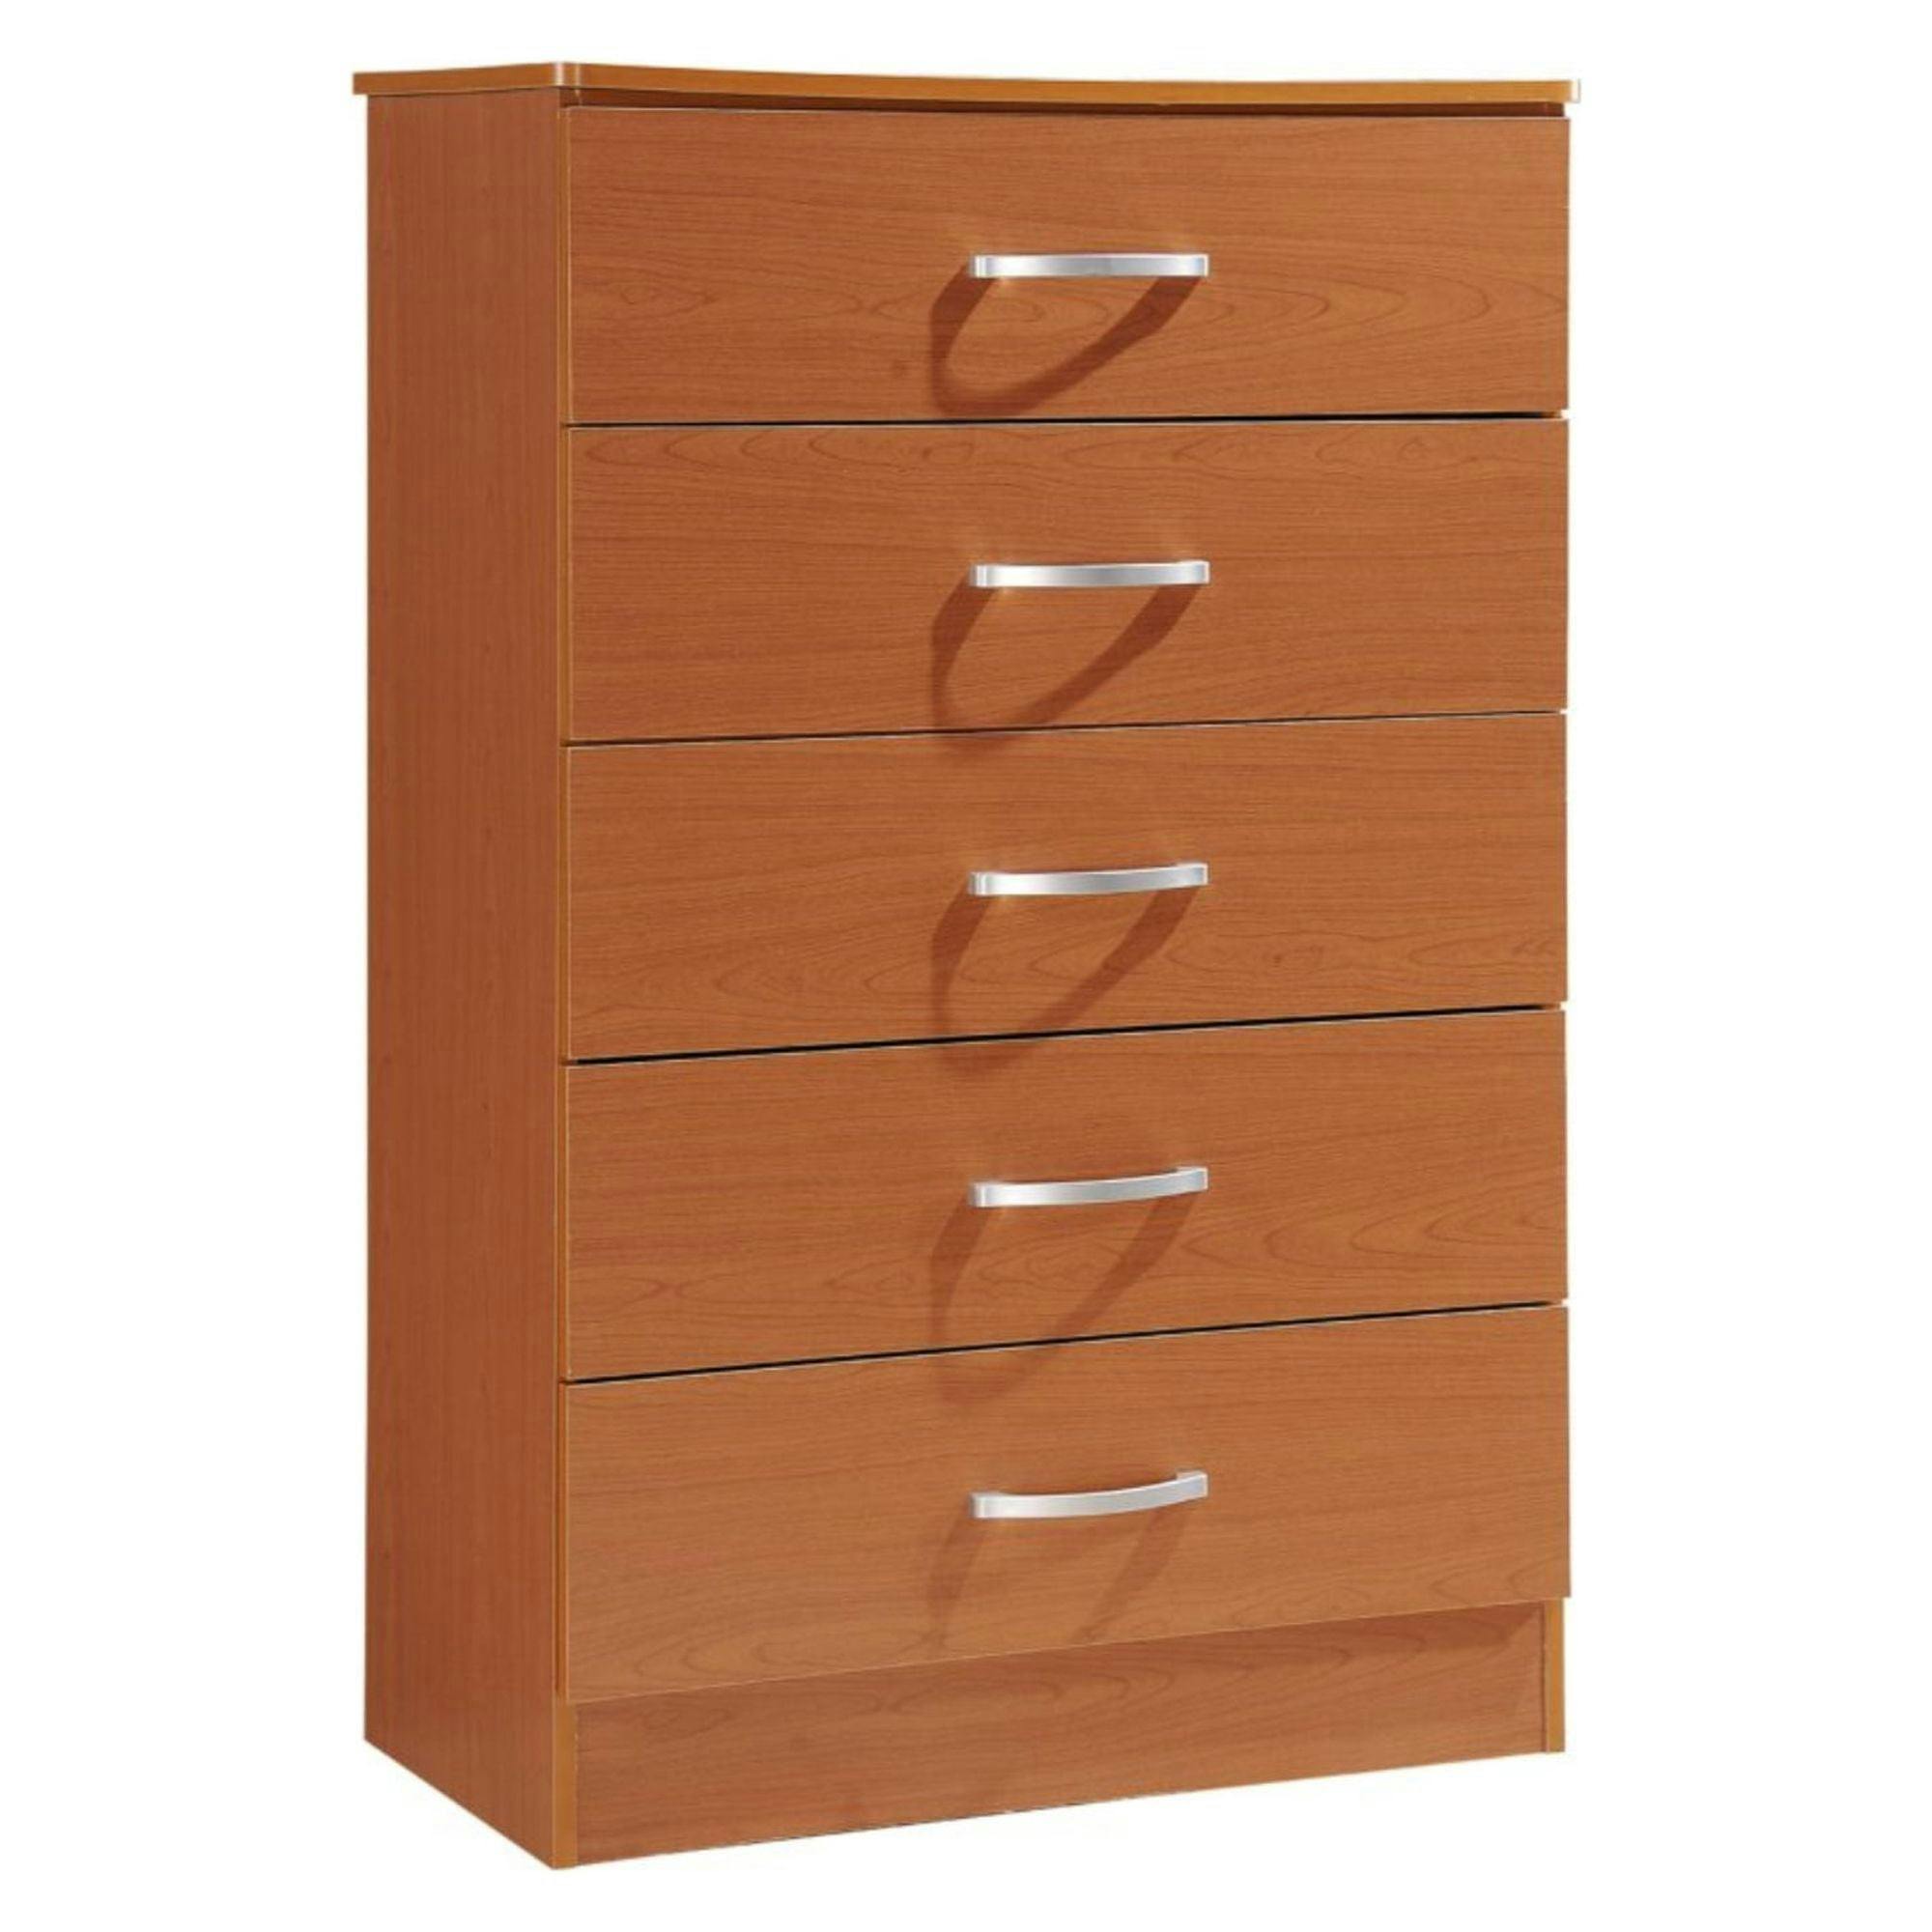 Cherry Finish 5-Drawer Bedroom Chest with Metal Glides and Ample Storage